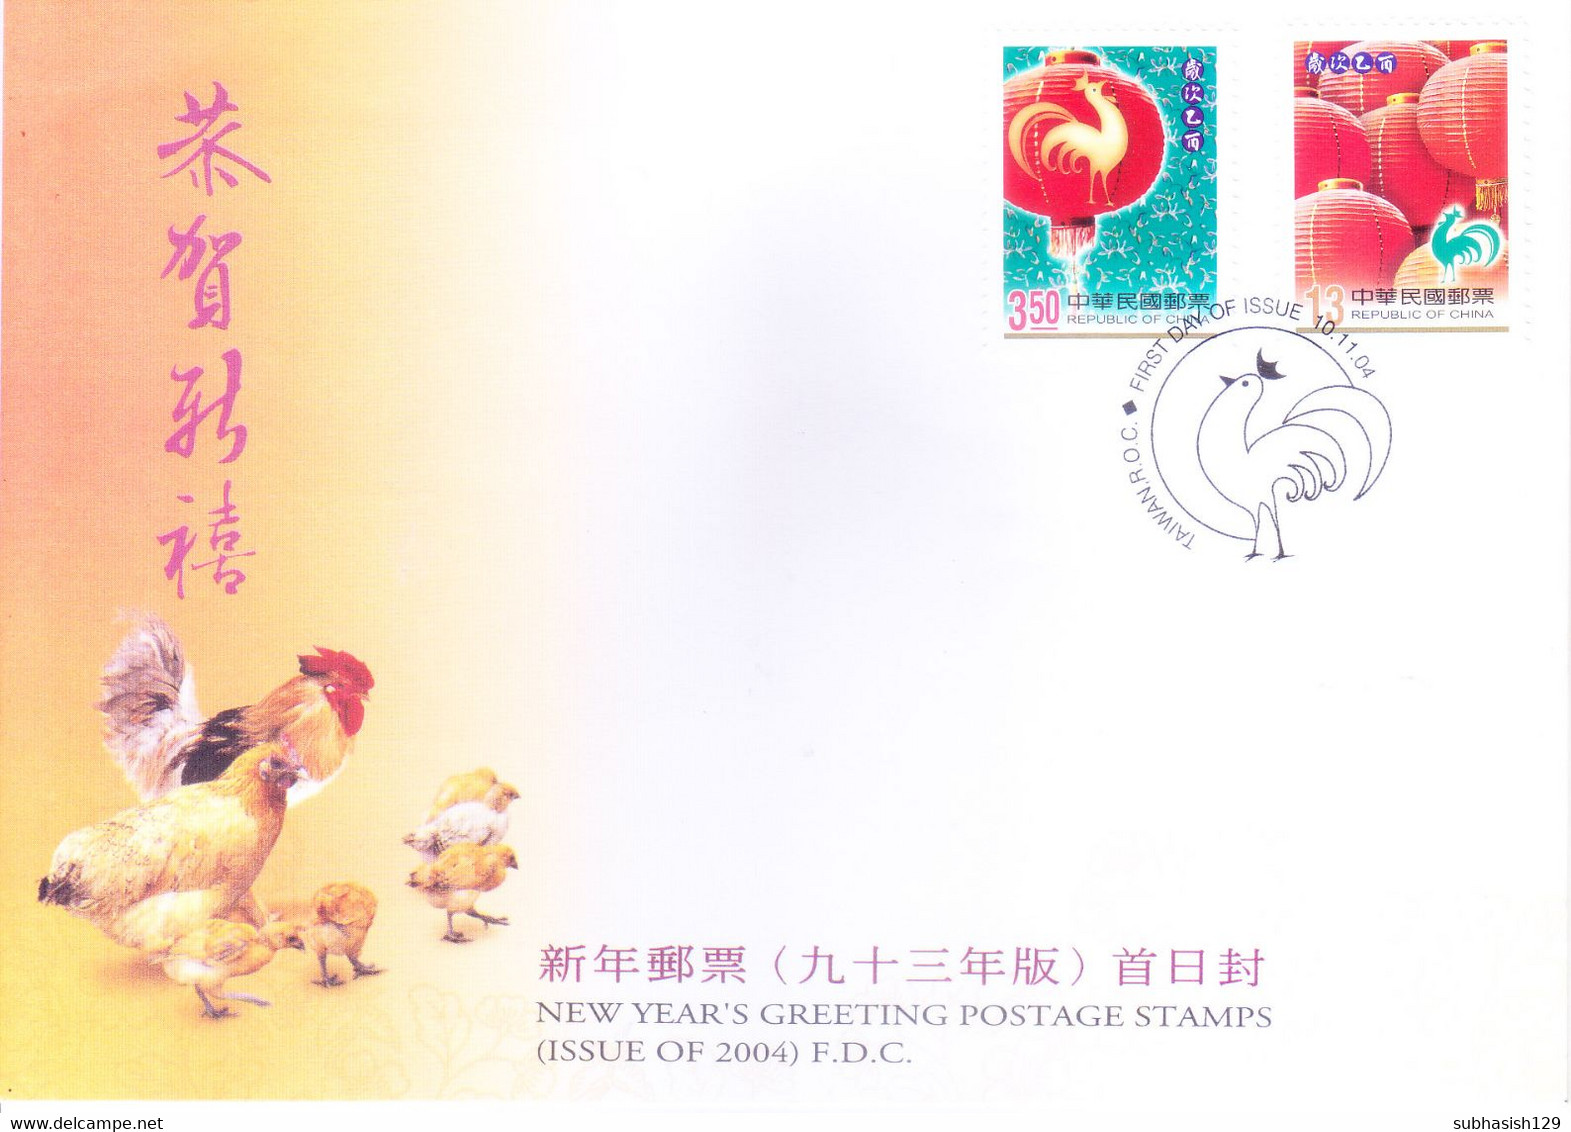 TAIWAN - CHINESE ADMINISTRATION : FDC : 10 NOV 2004 : NEW YEAR GREETINGS, LUNAR CHINESE ZODIAC CHICKEN LANTERN - Lettres & Documents